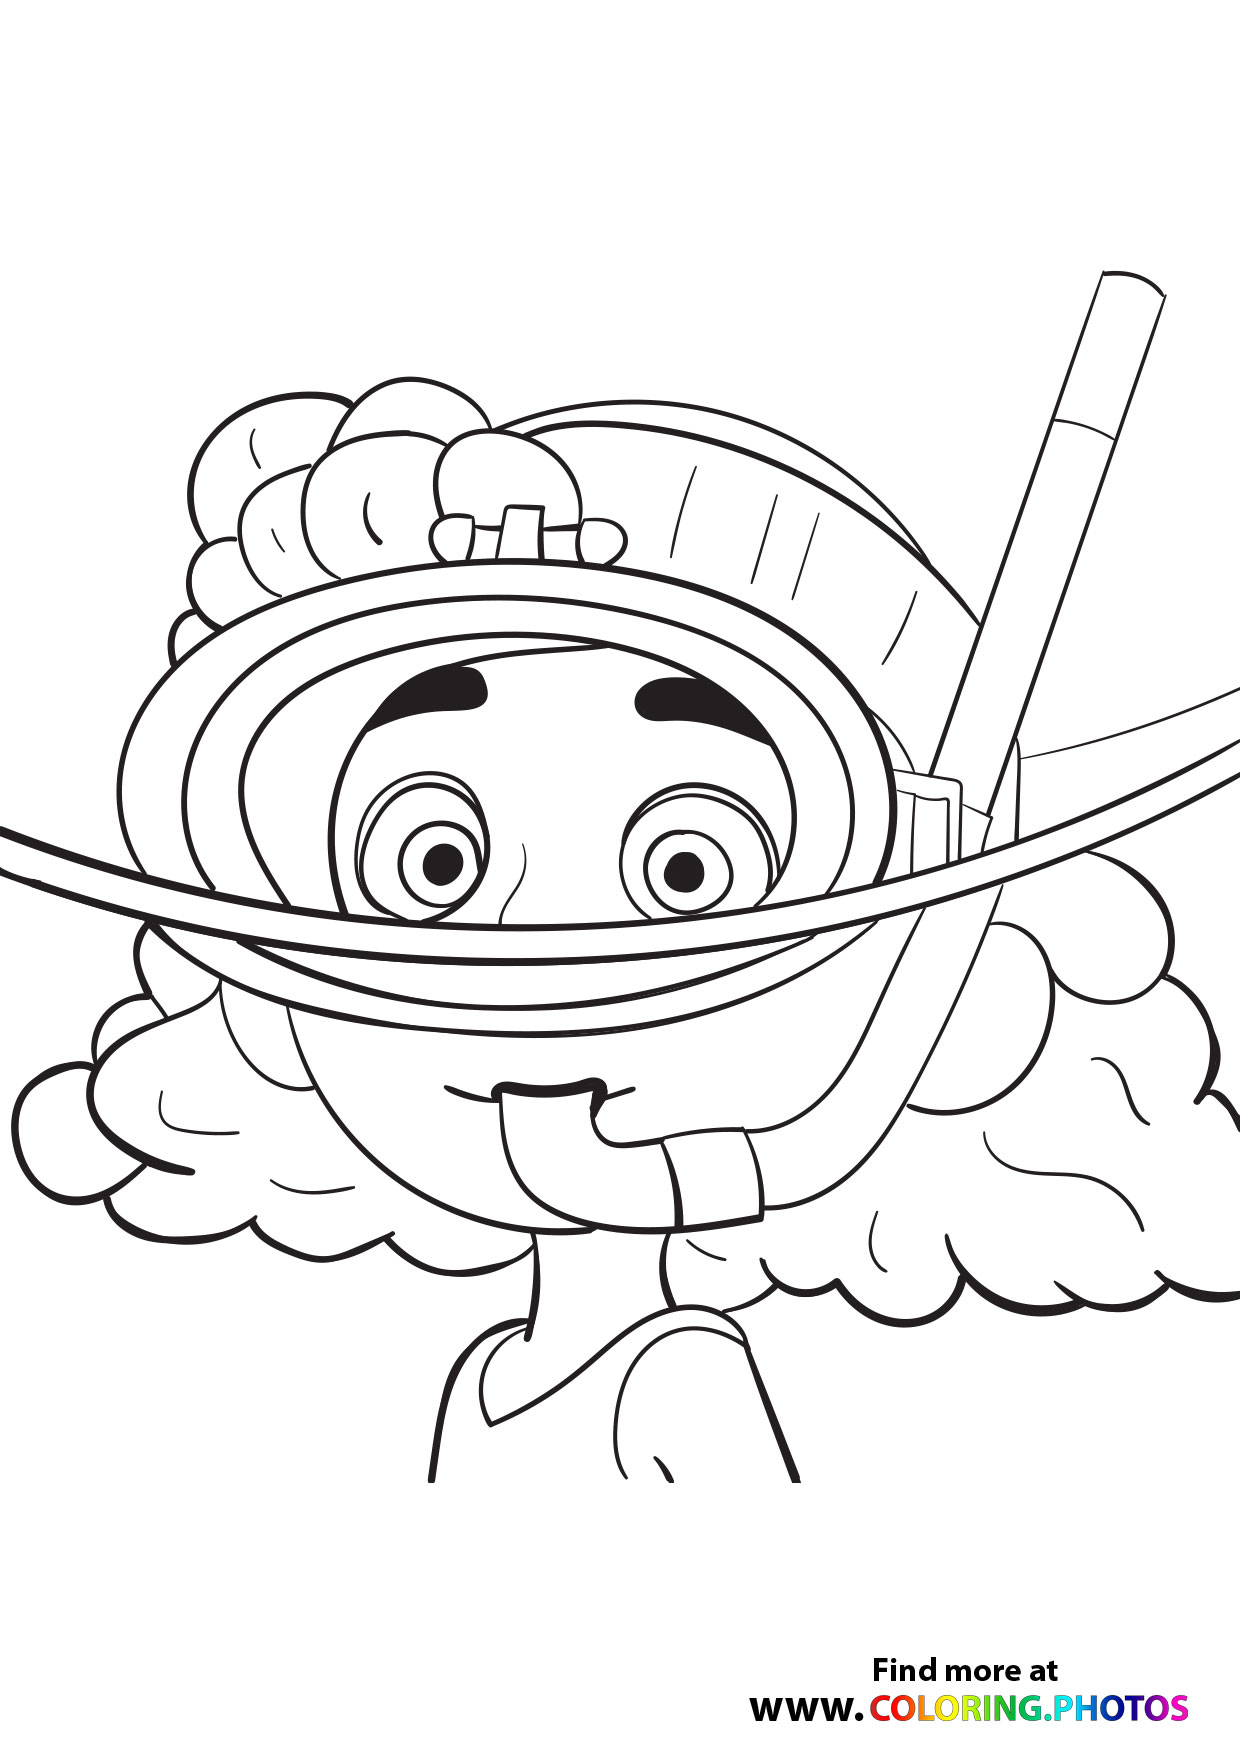 Disney Luca coloring pages Coloring Pages for kids